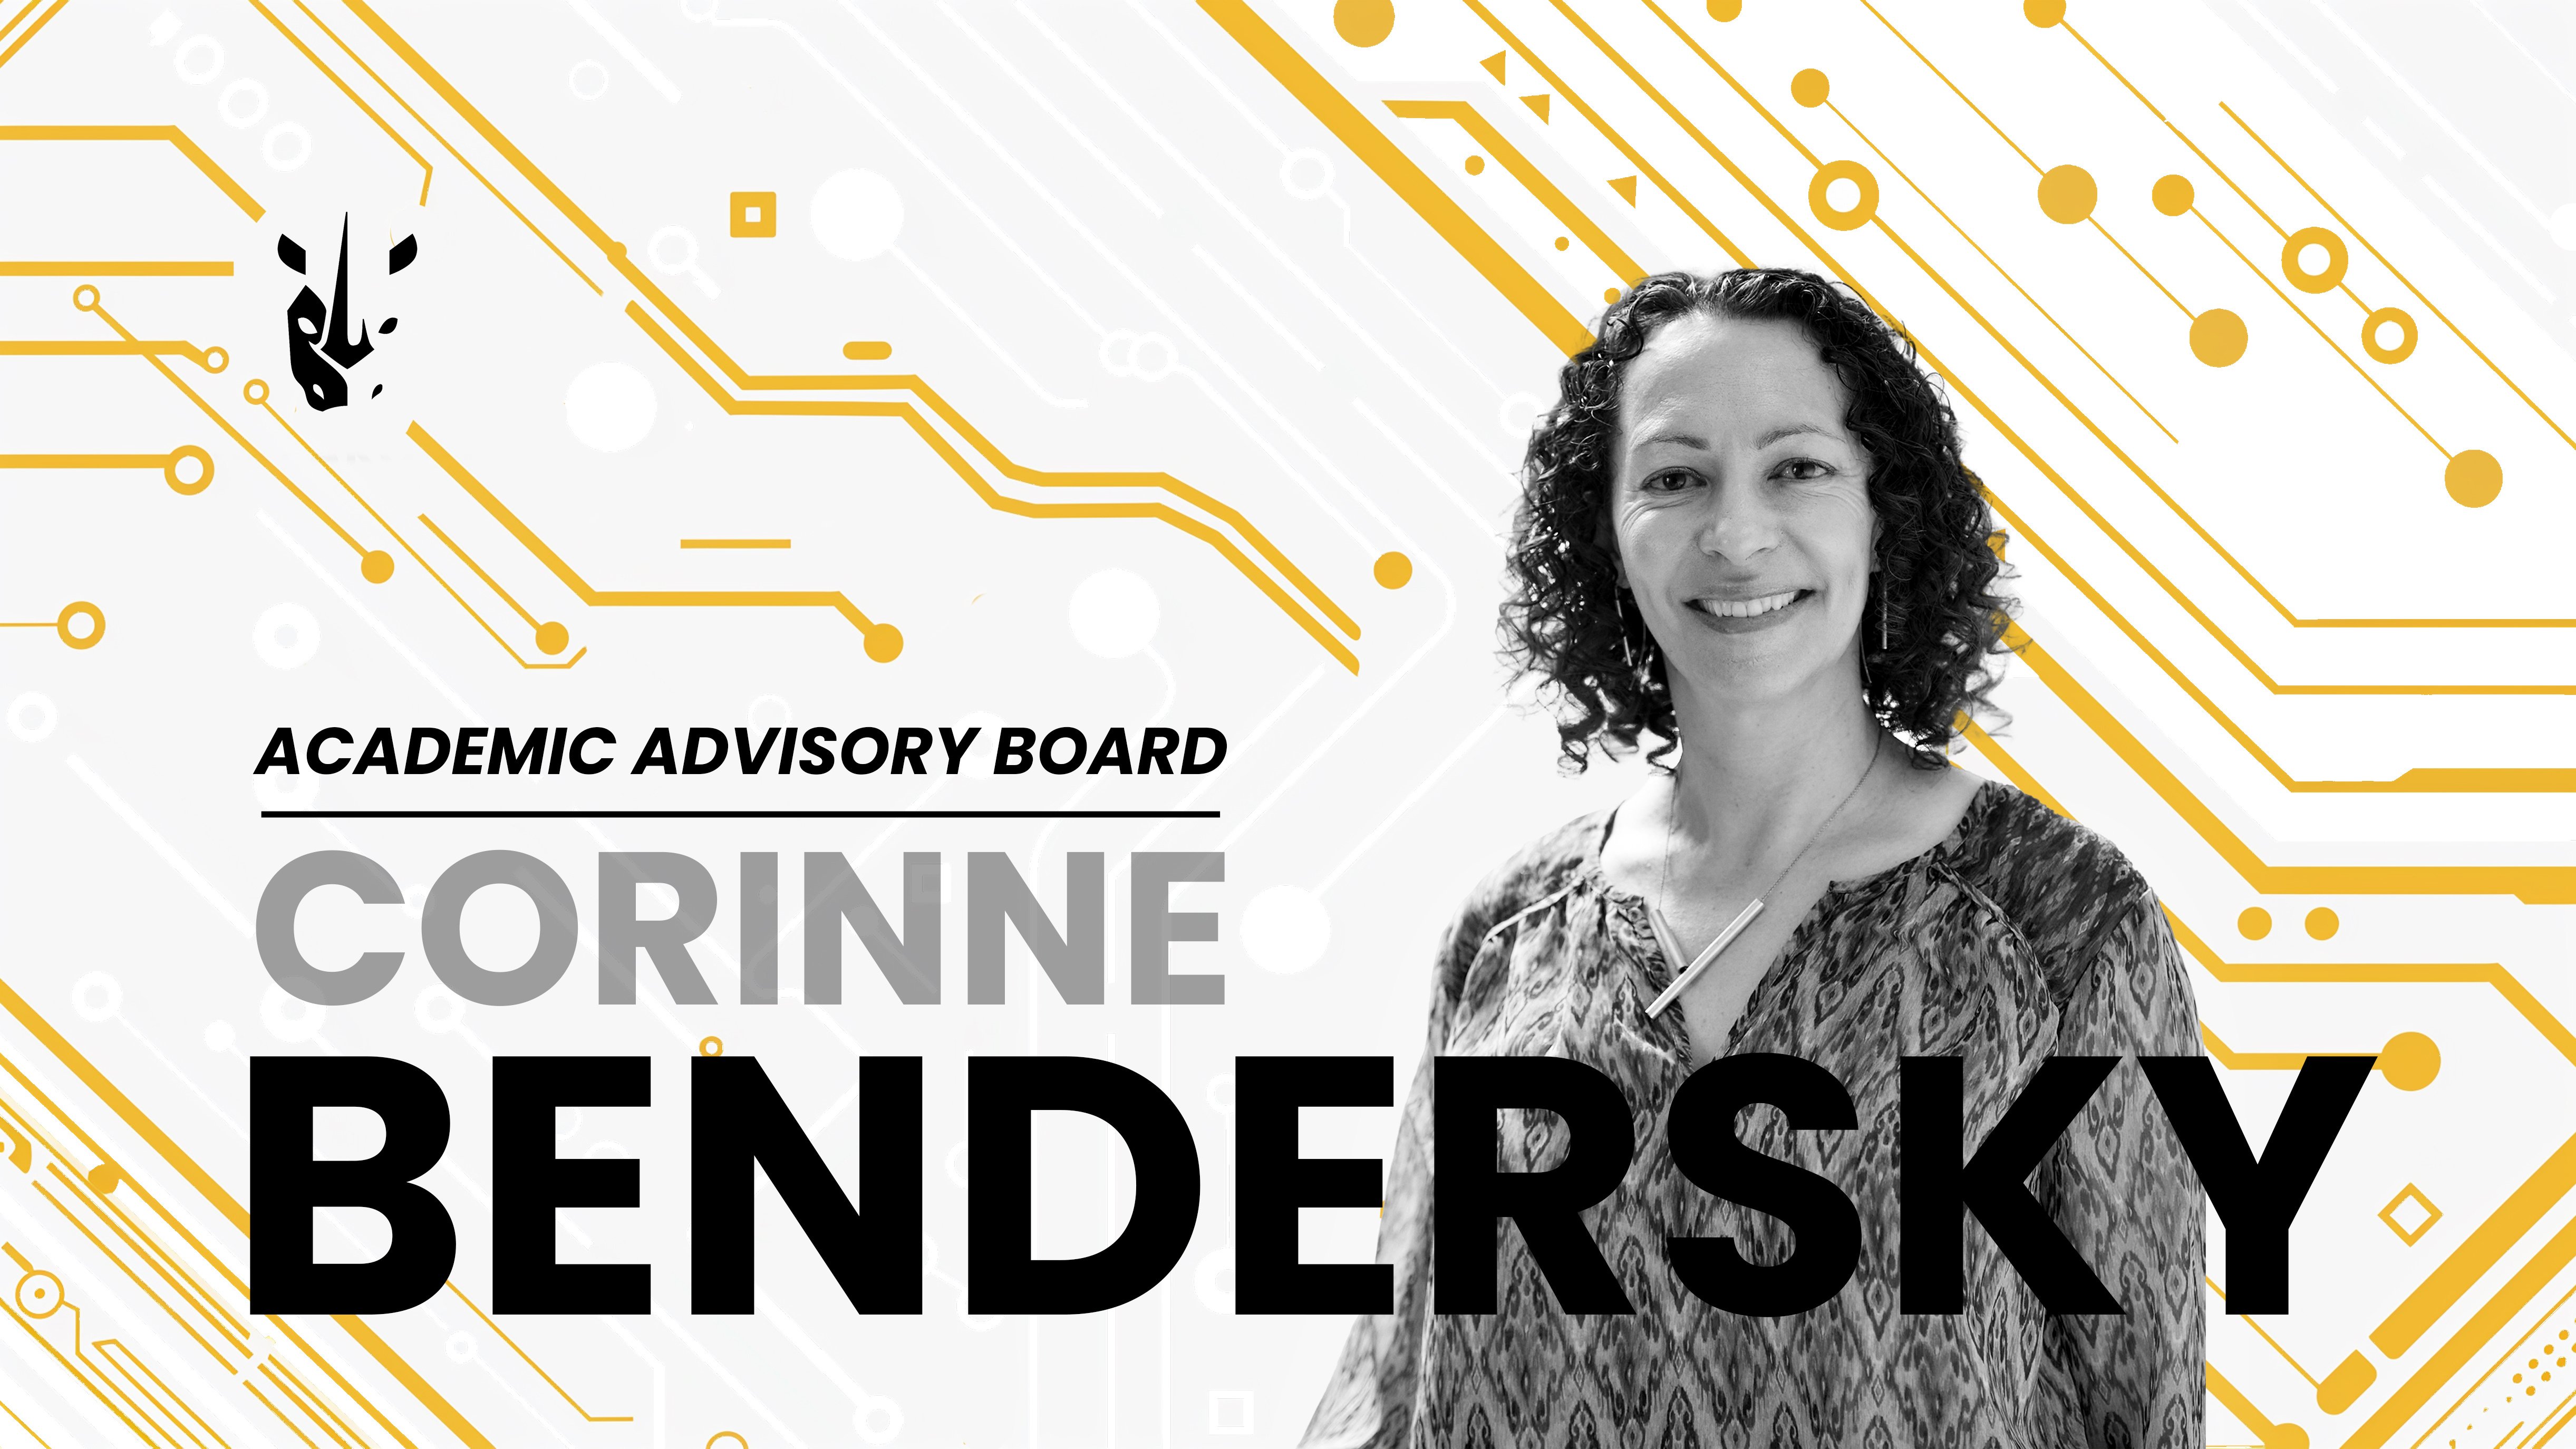 Breakout Learning Names Corrine Bendersky as HR Management Practice Leader on Its Academic Advisory Board